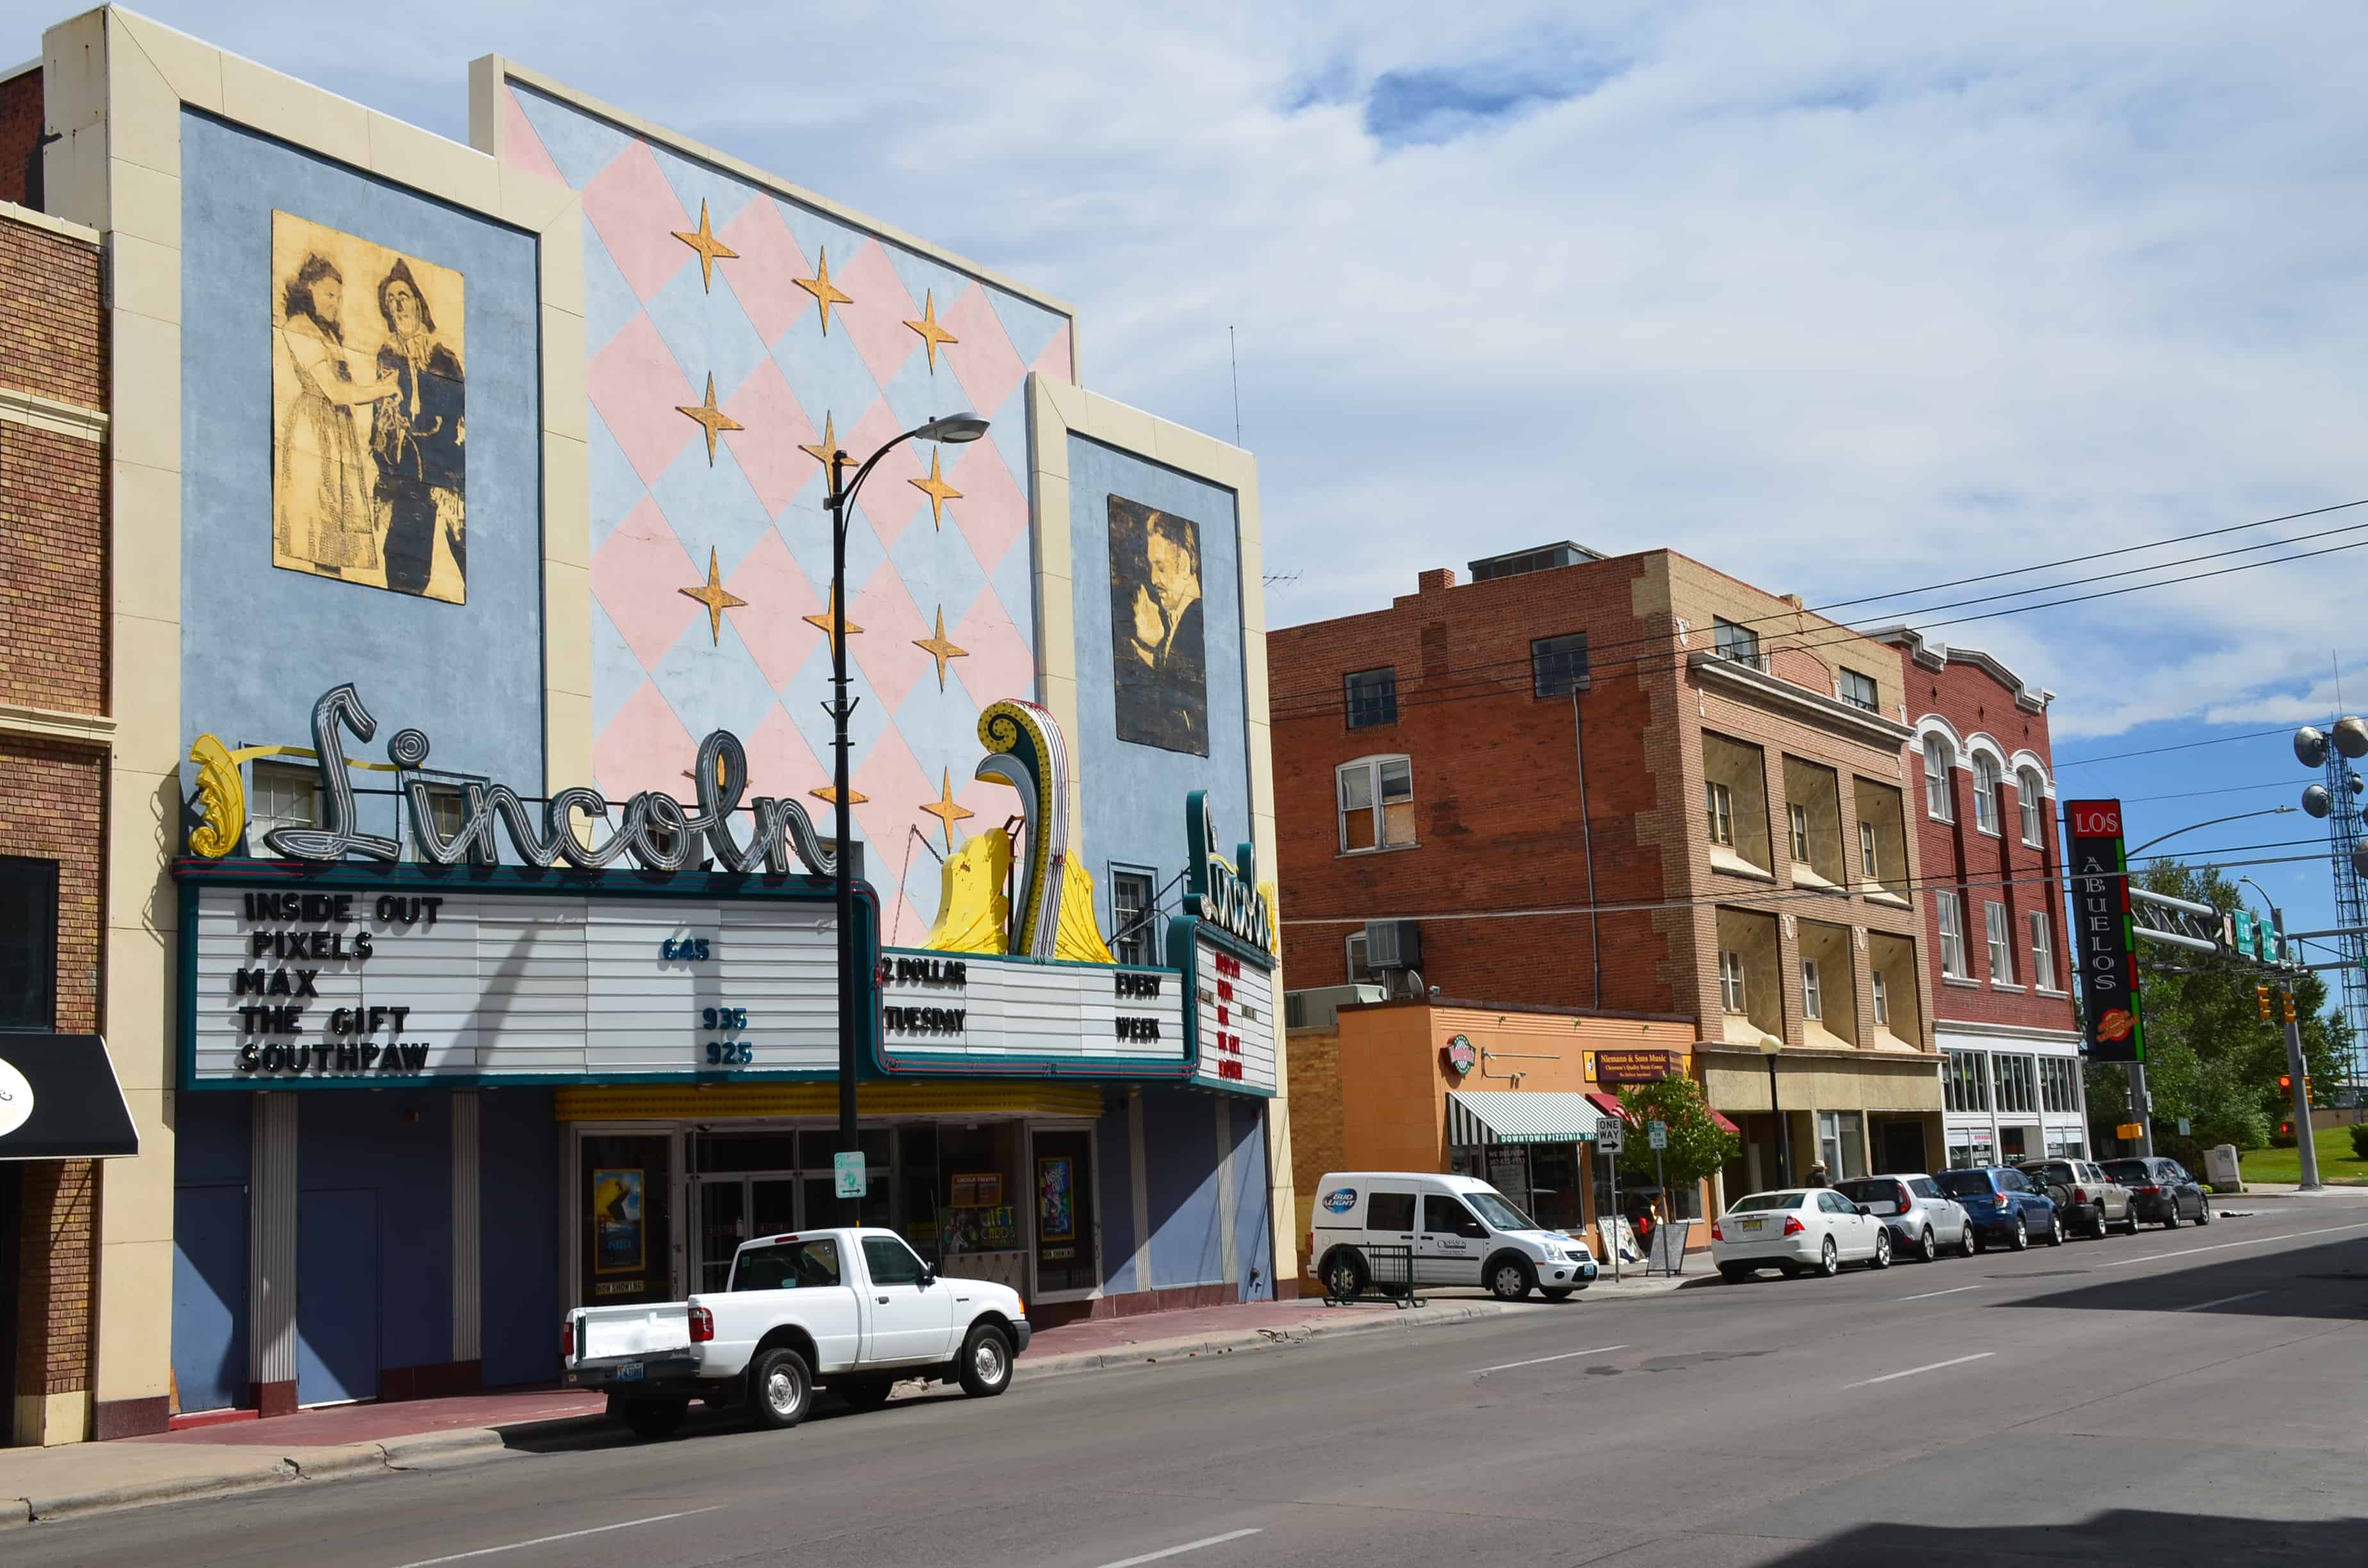 Lincoln Theater in Cheyenne, Wyoming